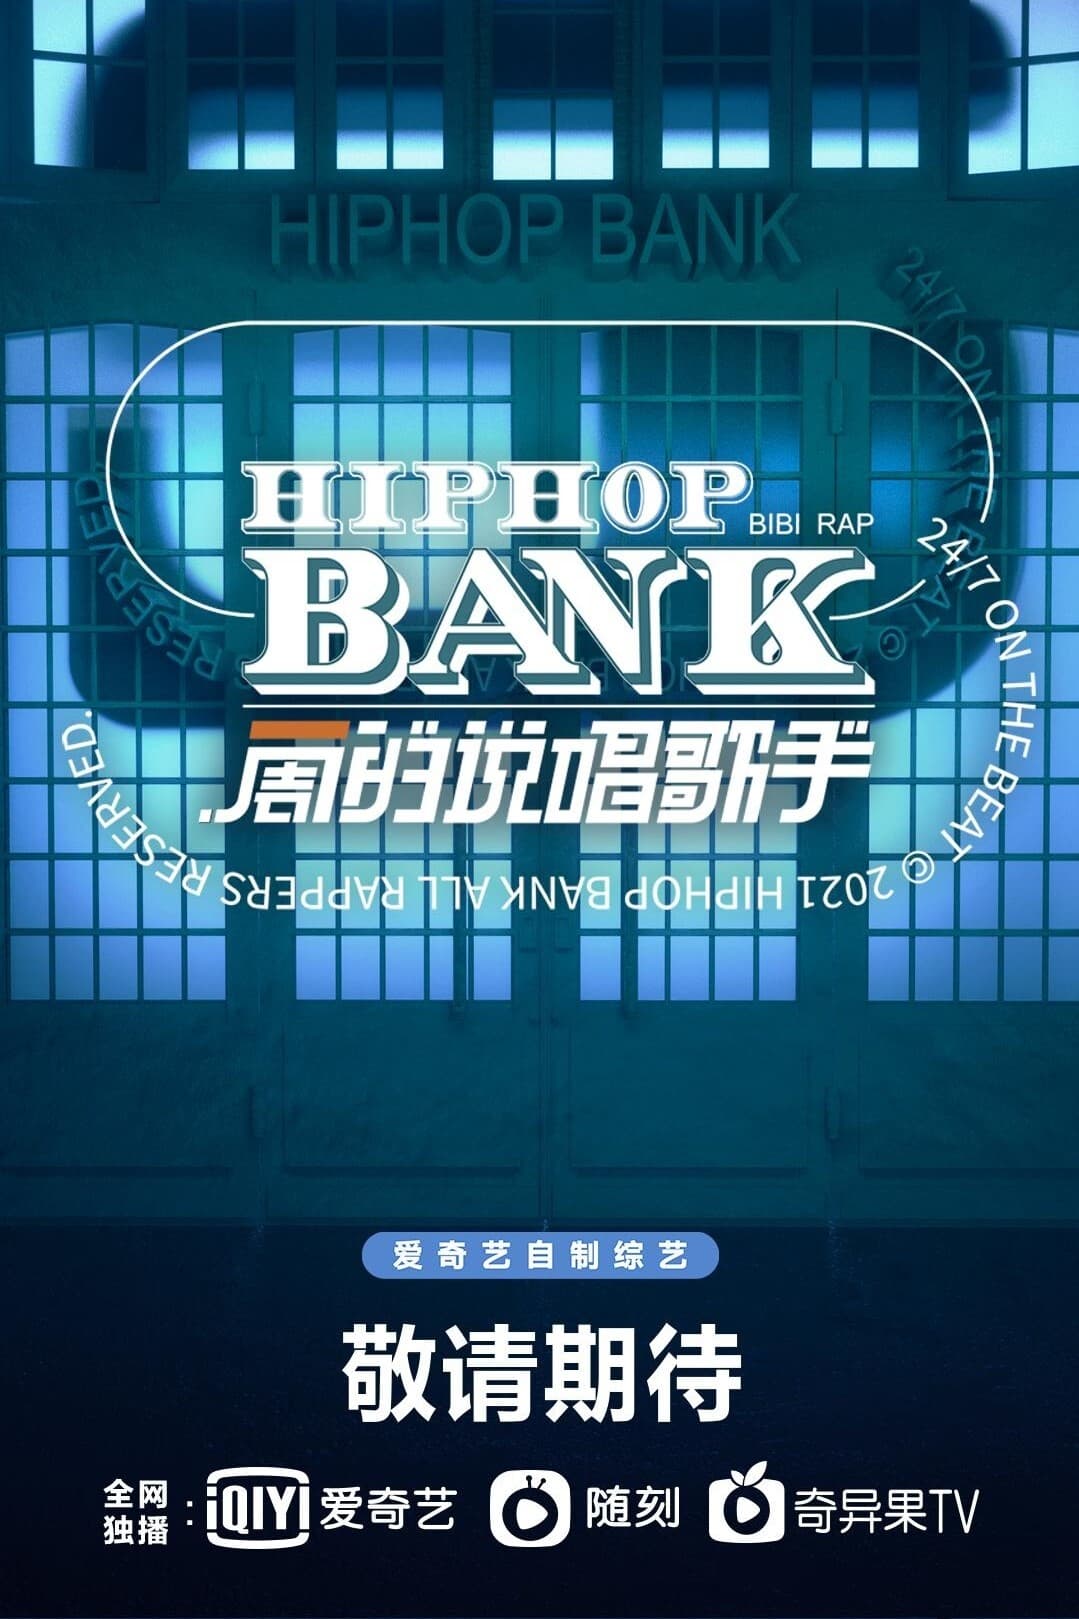 TV ratings for HipHop Bank (一周的说唱歌手) in Australia. iqiyi TV series